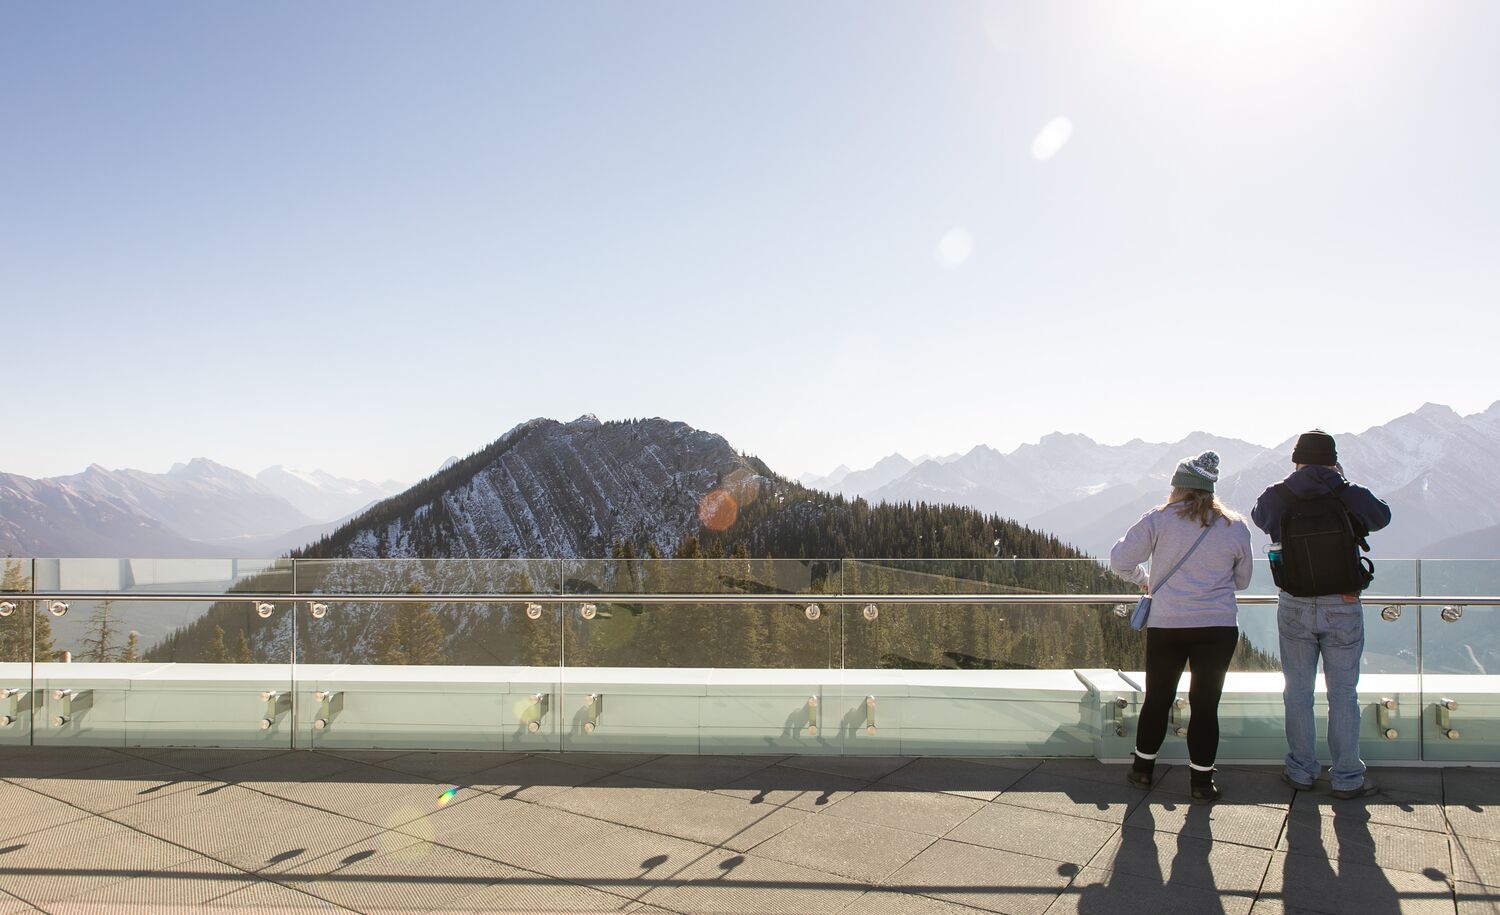 Two people look over the edge at the Banff Gondola with a mountain in the background.